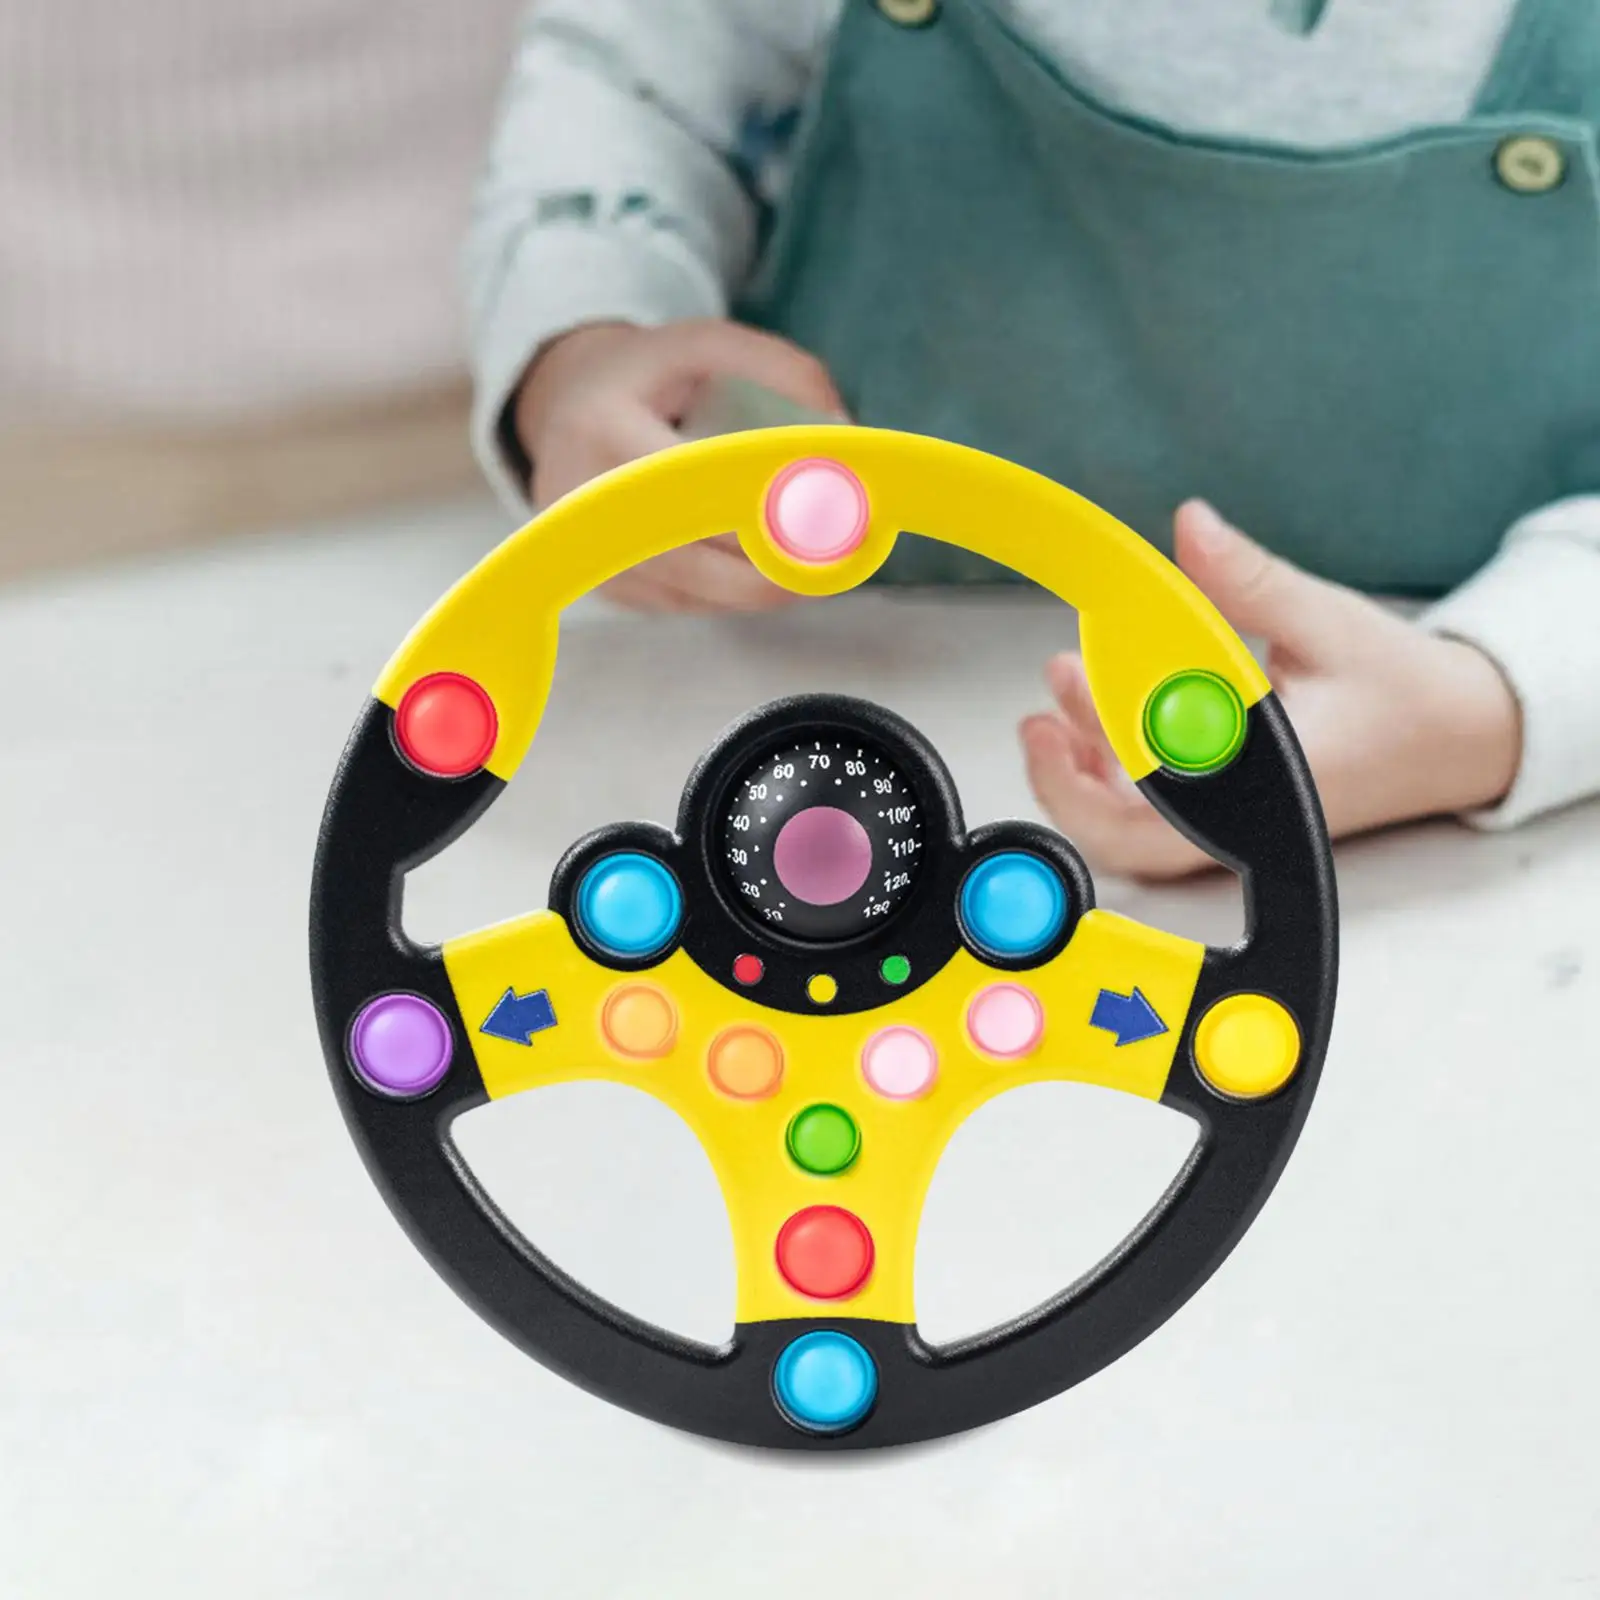 Plastic Simulation Steering Wheel Car Seat Toy,Fun Learning Toy Steering Wheel Pretend Play Toys for Children